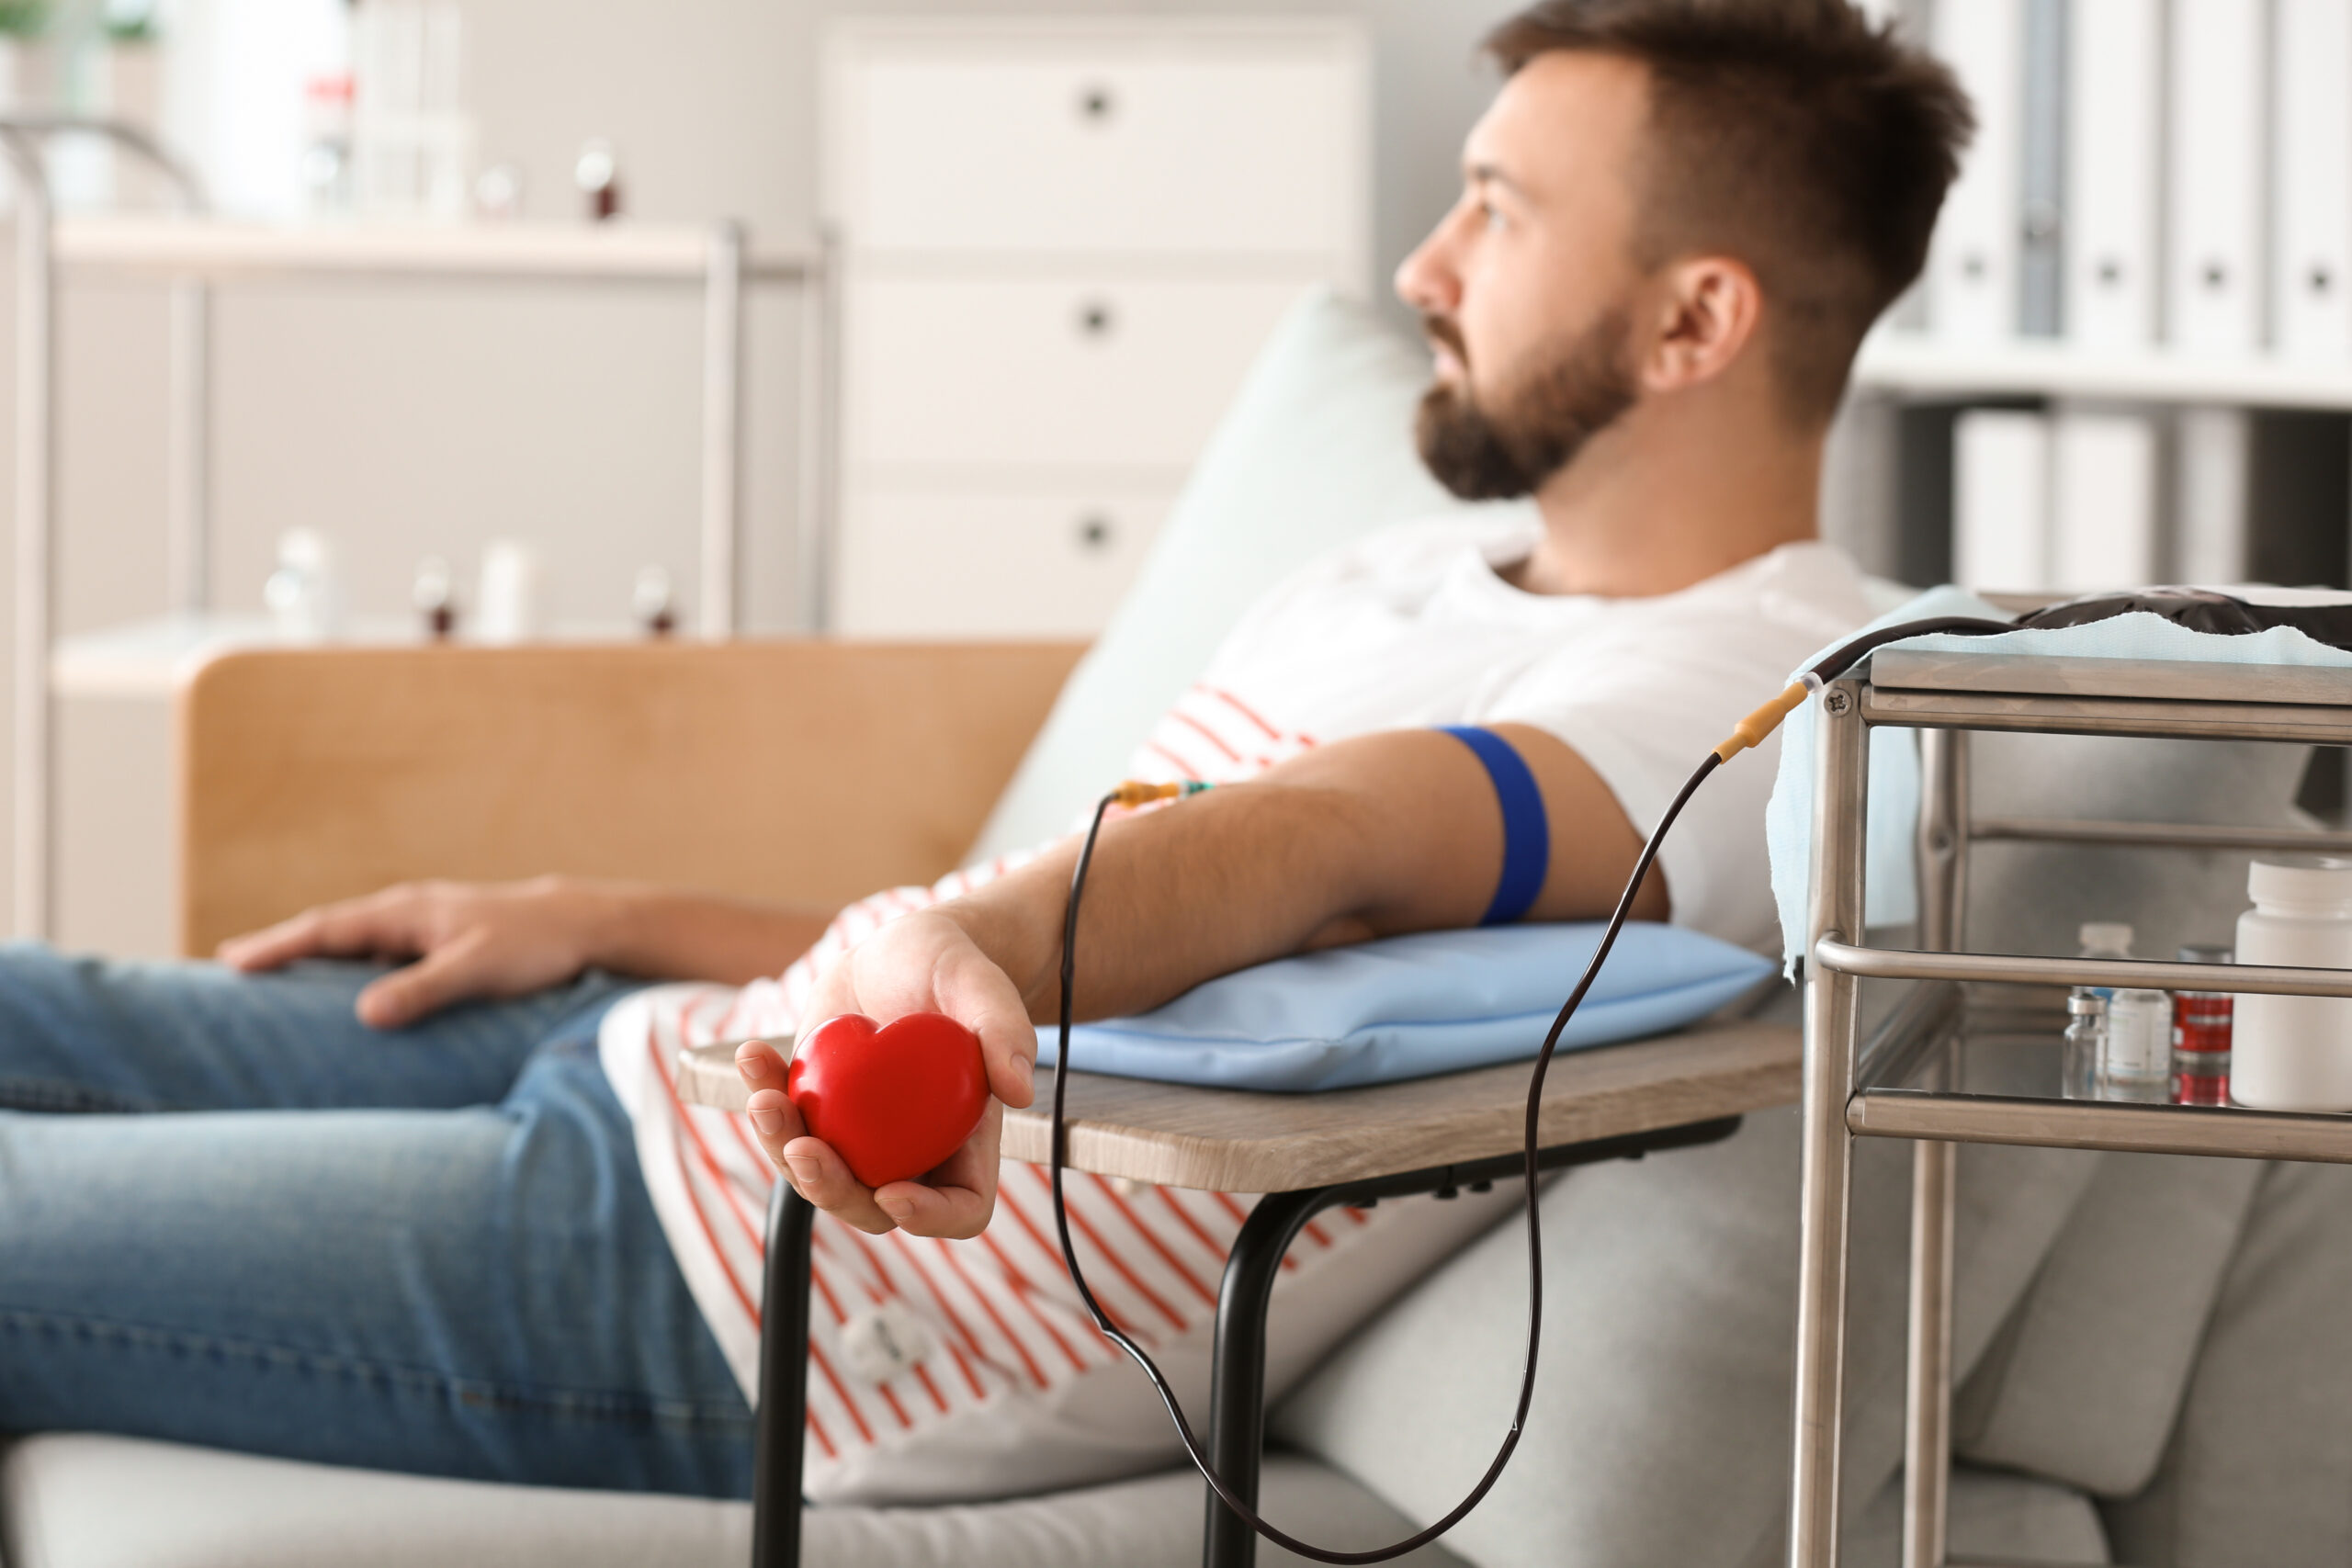 FDA blood donation proposal, gay, bisexual, queer men, rules, PrEP, HIV, Man,Donating,Blood,In,Hospital